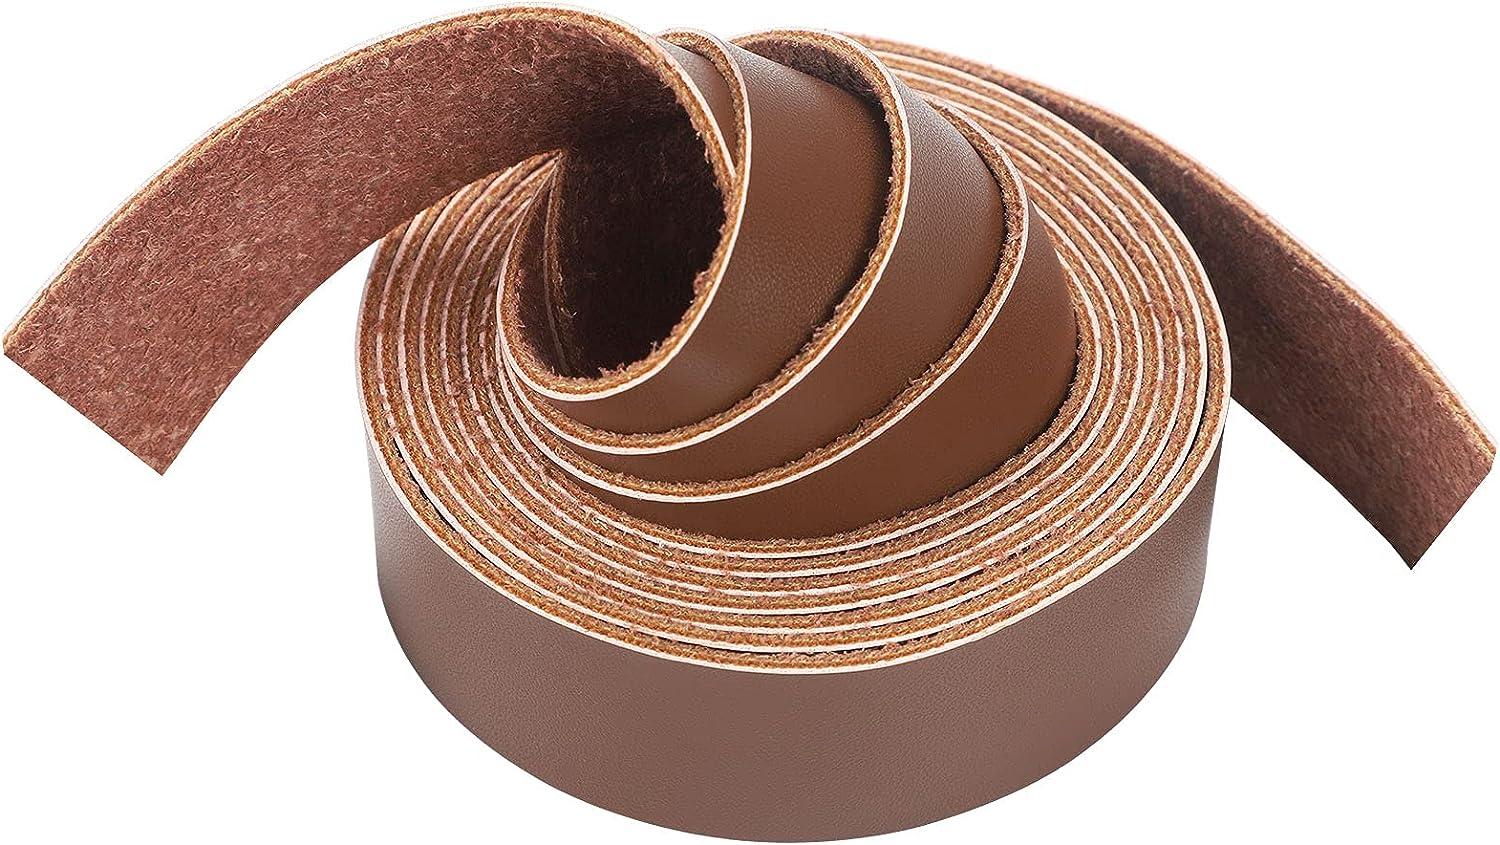 CDY Brown Leather Strap 90 Inches Long 1 inch Wide, Leather Belt Strips Very Suitable for DIY Craft Projects, Pet Collars, Traction Ropes,Belts